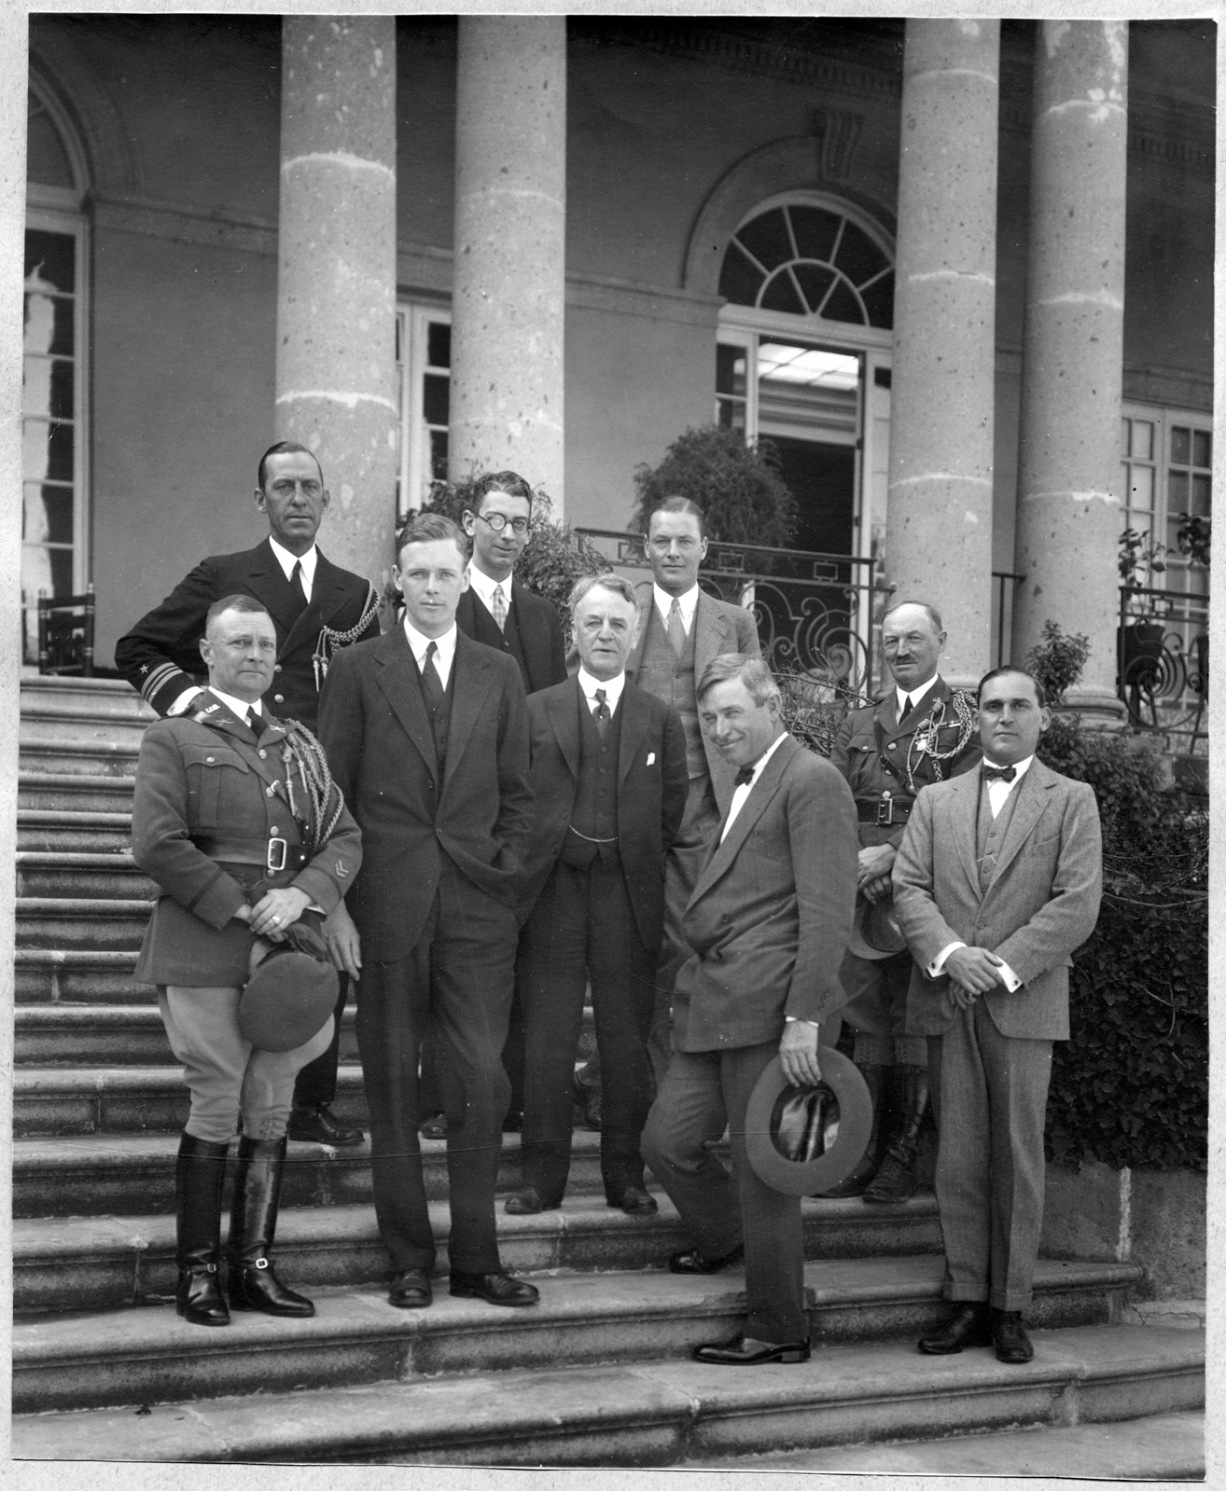 Ambassador Morrow, with his specially-chosen team of American envoys, including aviator Charles Lindbergh and humorist Will Rogers, Mexico City, 1927. http://consecratedeminence.wordpress.com/2014/03/16/the-lone-eagle-meets-the-ham-eggs-diplomat/. 